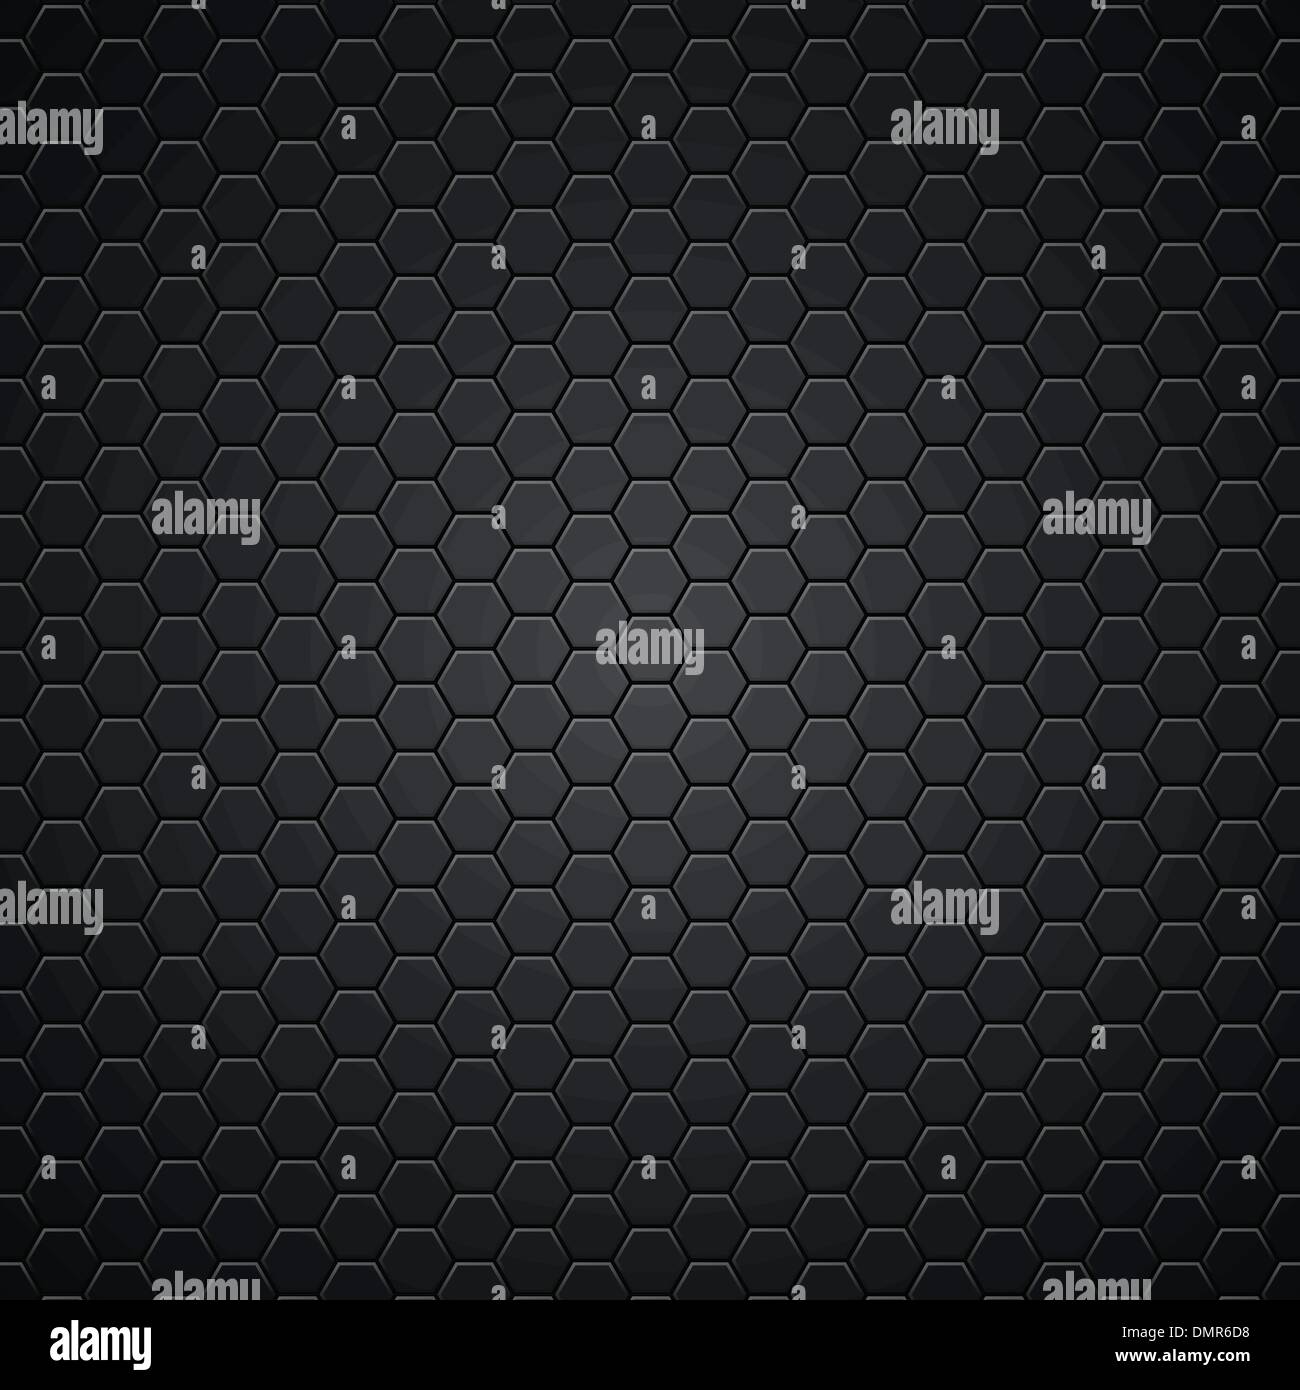 Solid black Stock Vector Images - Alamy